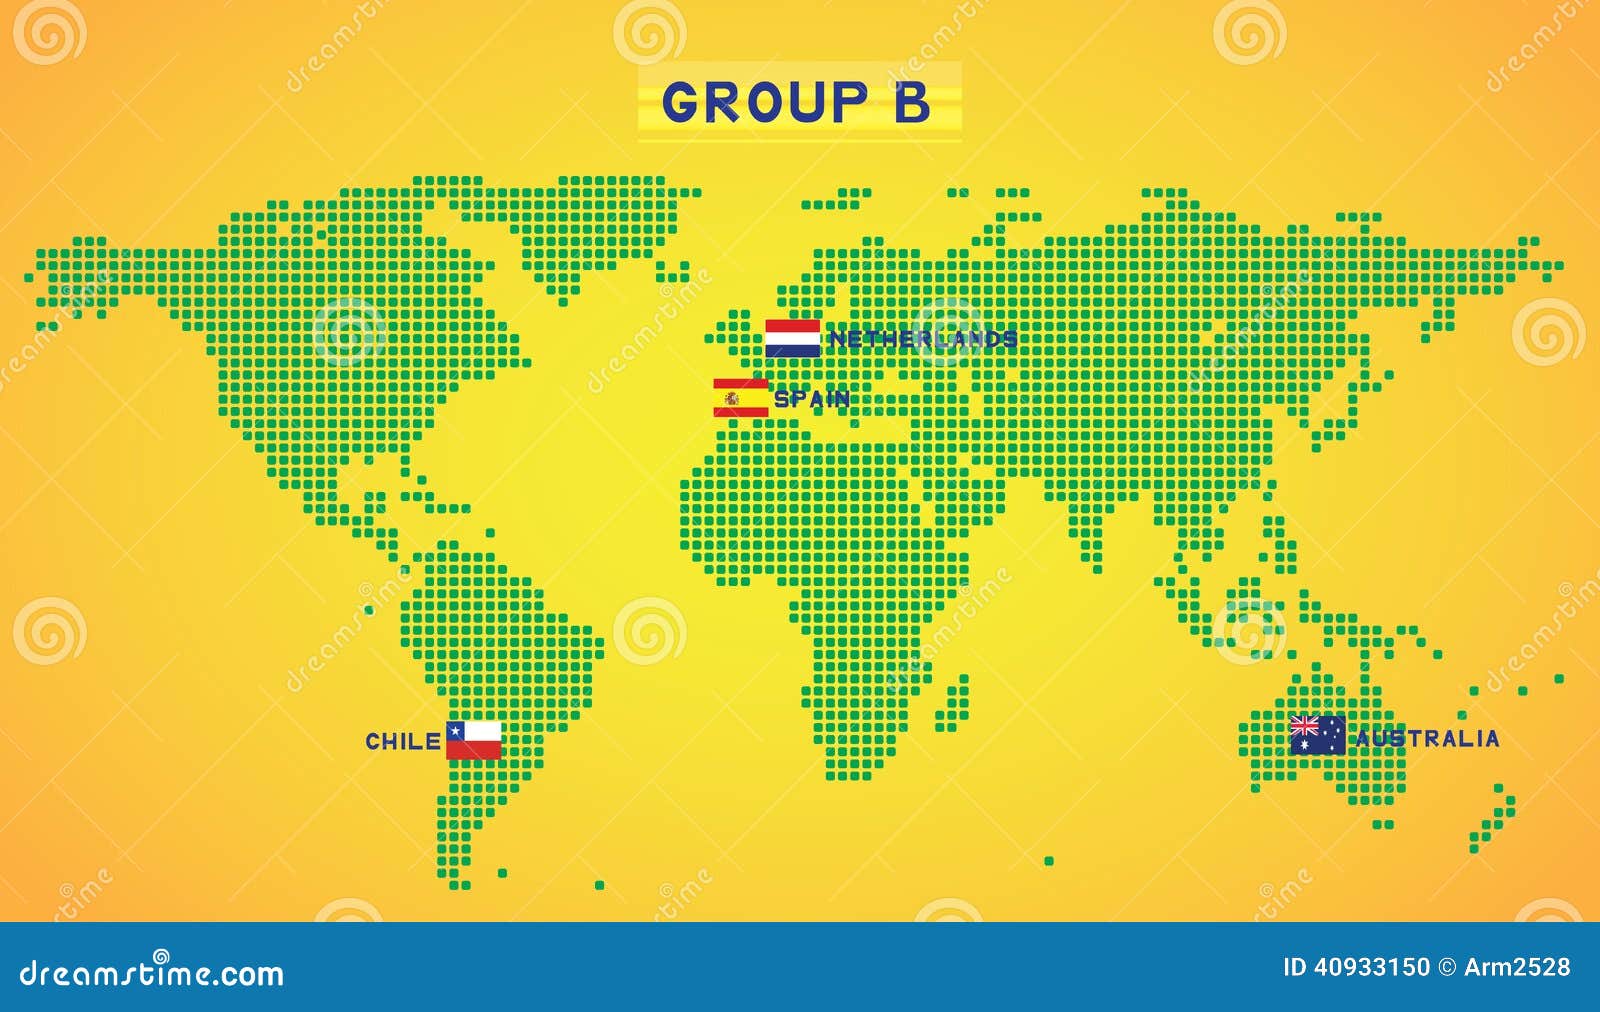 Maps group